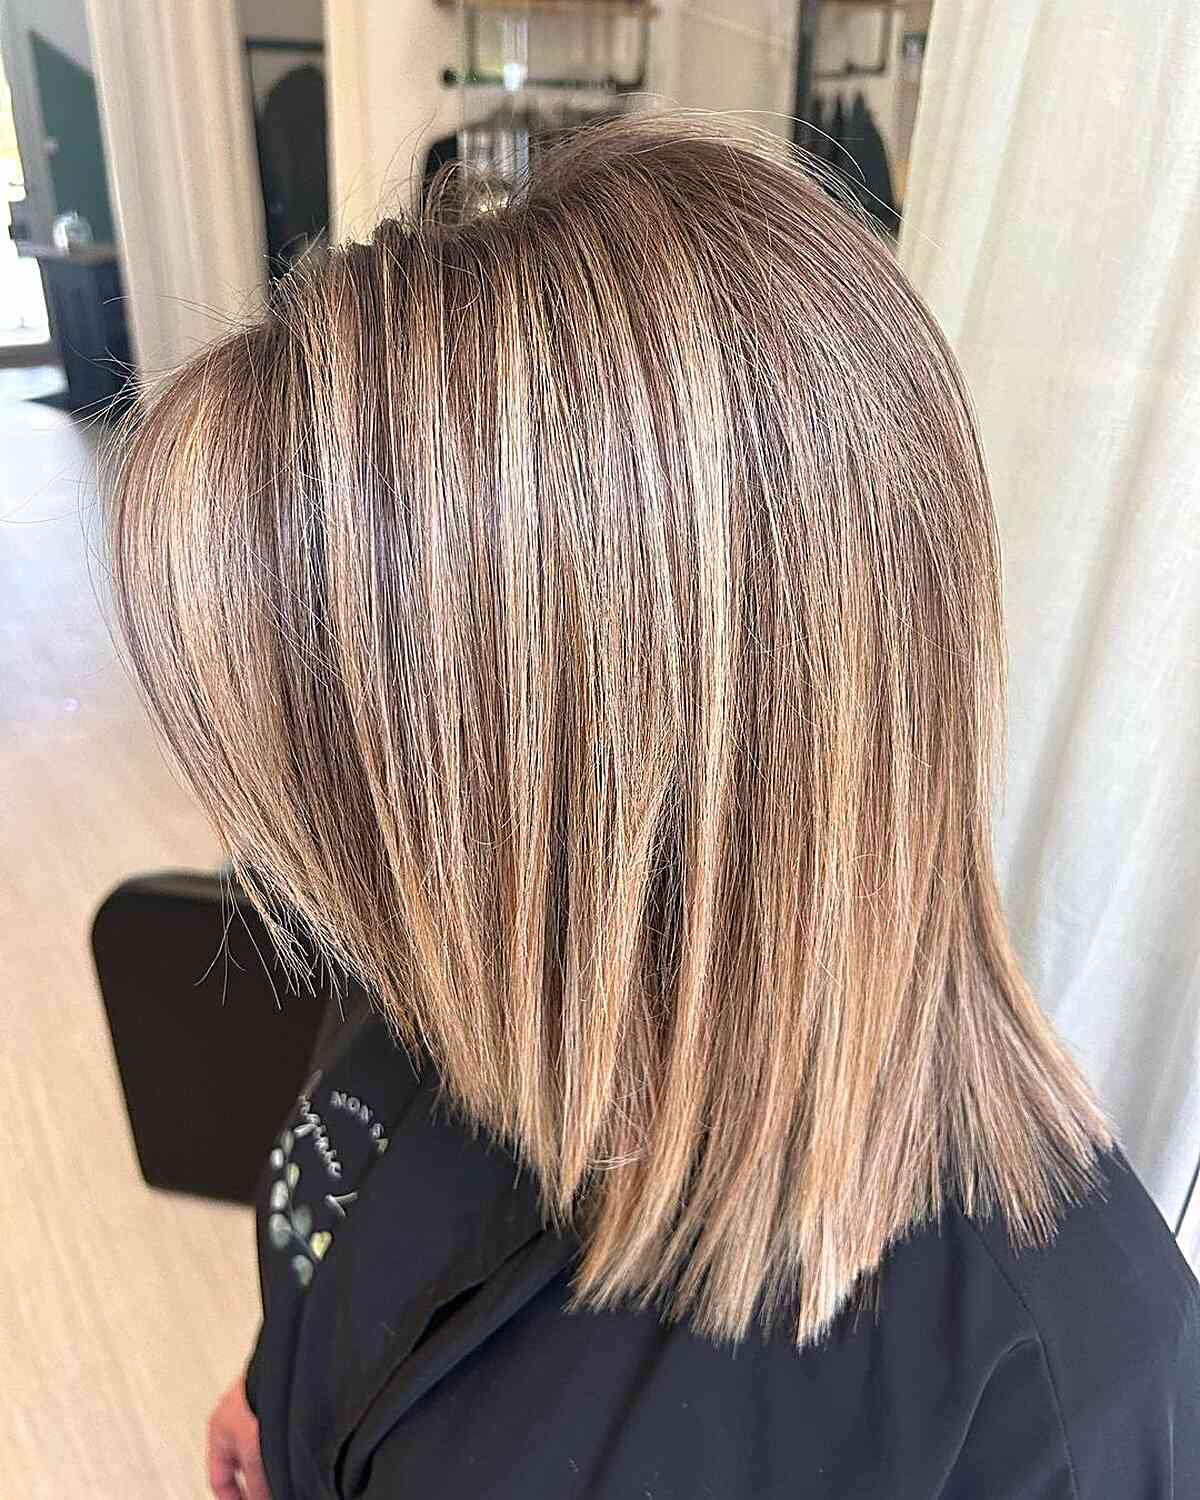 Shoulder-Grazing Choppy Haircut with Golden Bronde Highlights Blonde Balayage Straight Hair